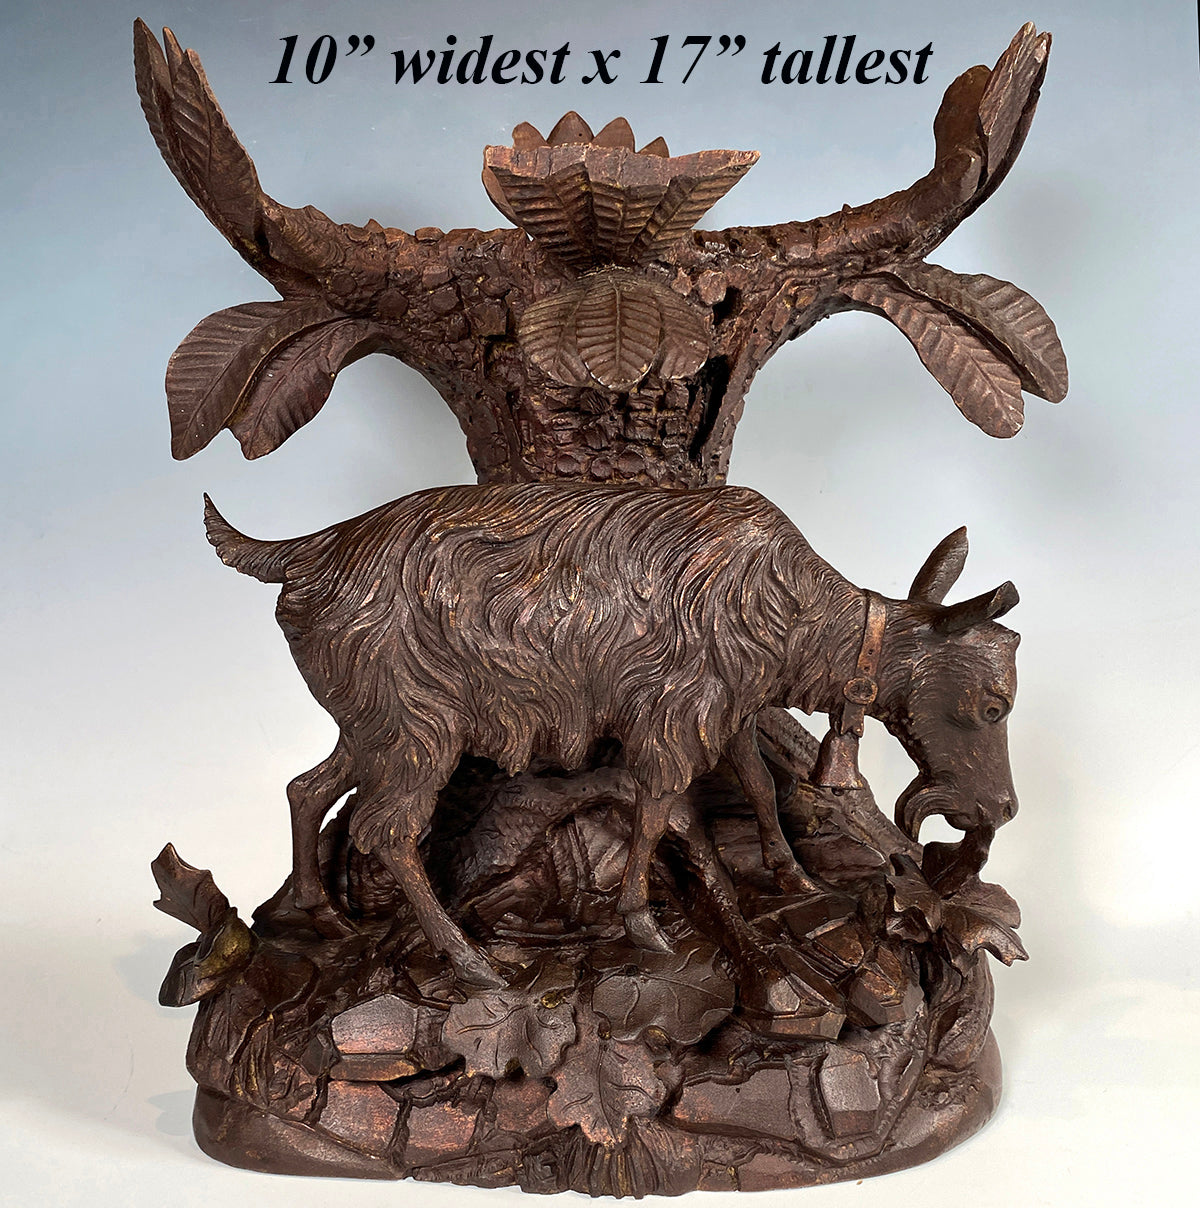 Huge 17" Tall Antique 19th Century Hand Carved Swiss Black Forest Stand for Oval Bowl, Goat